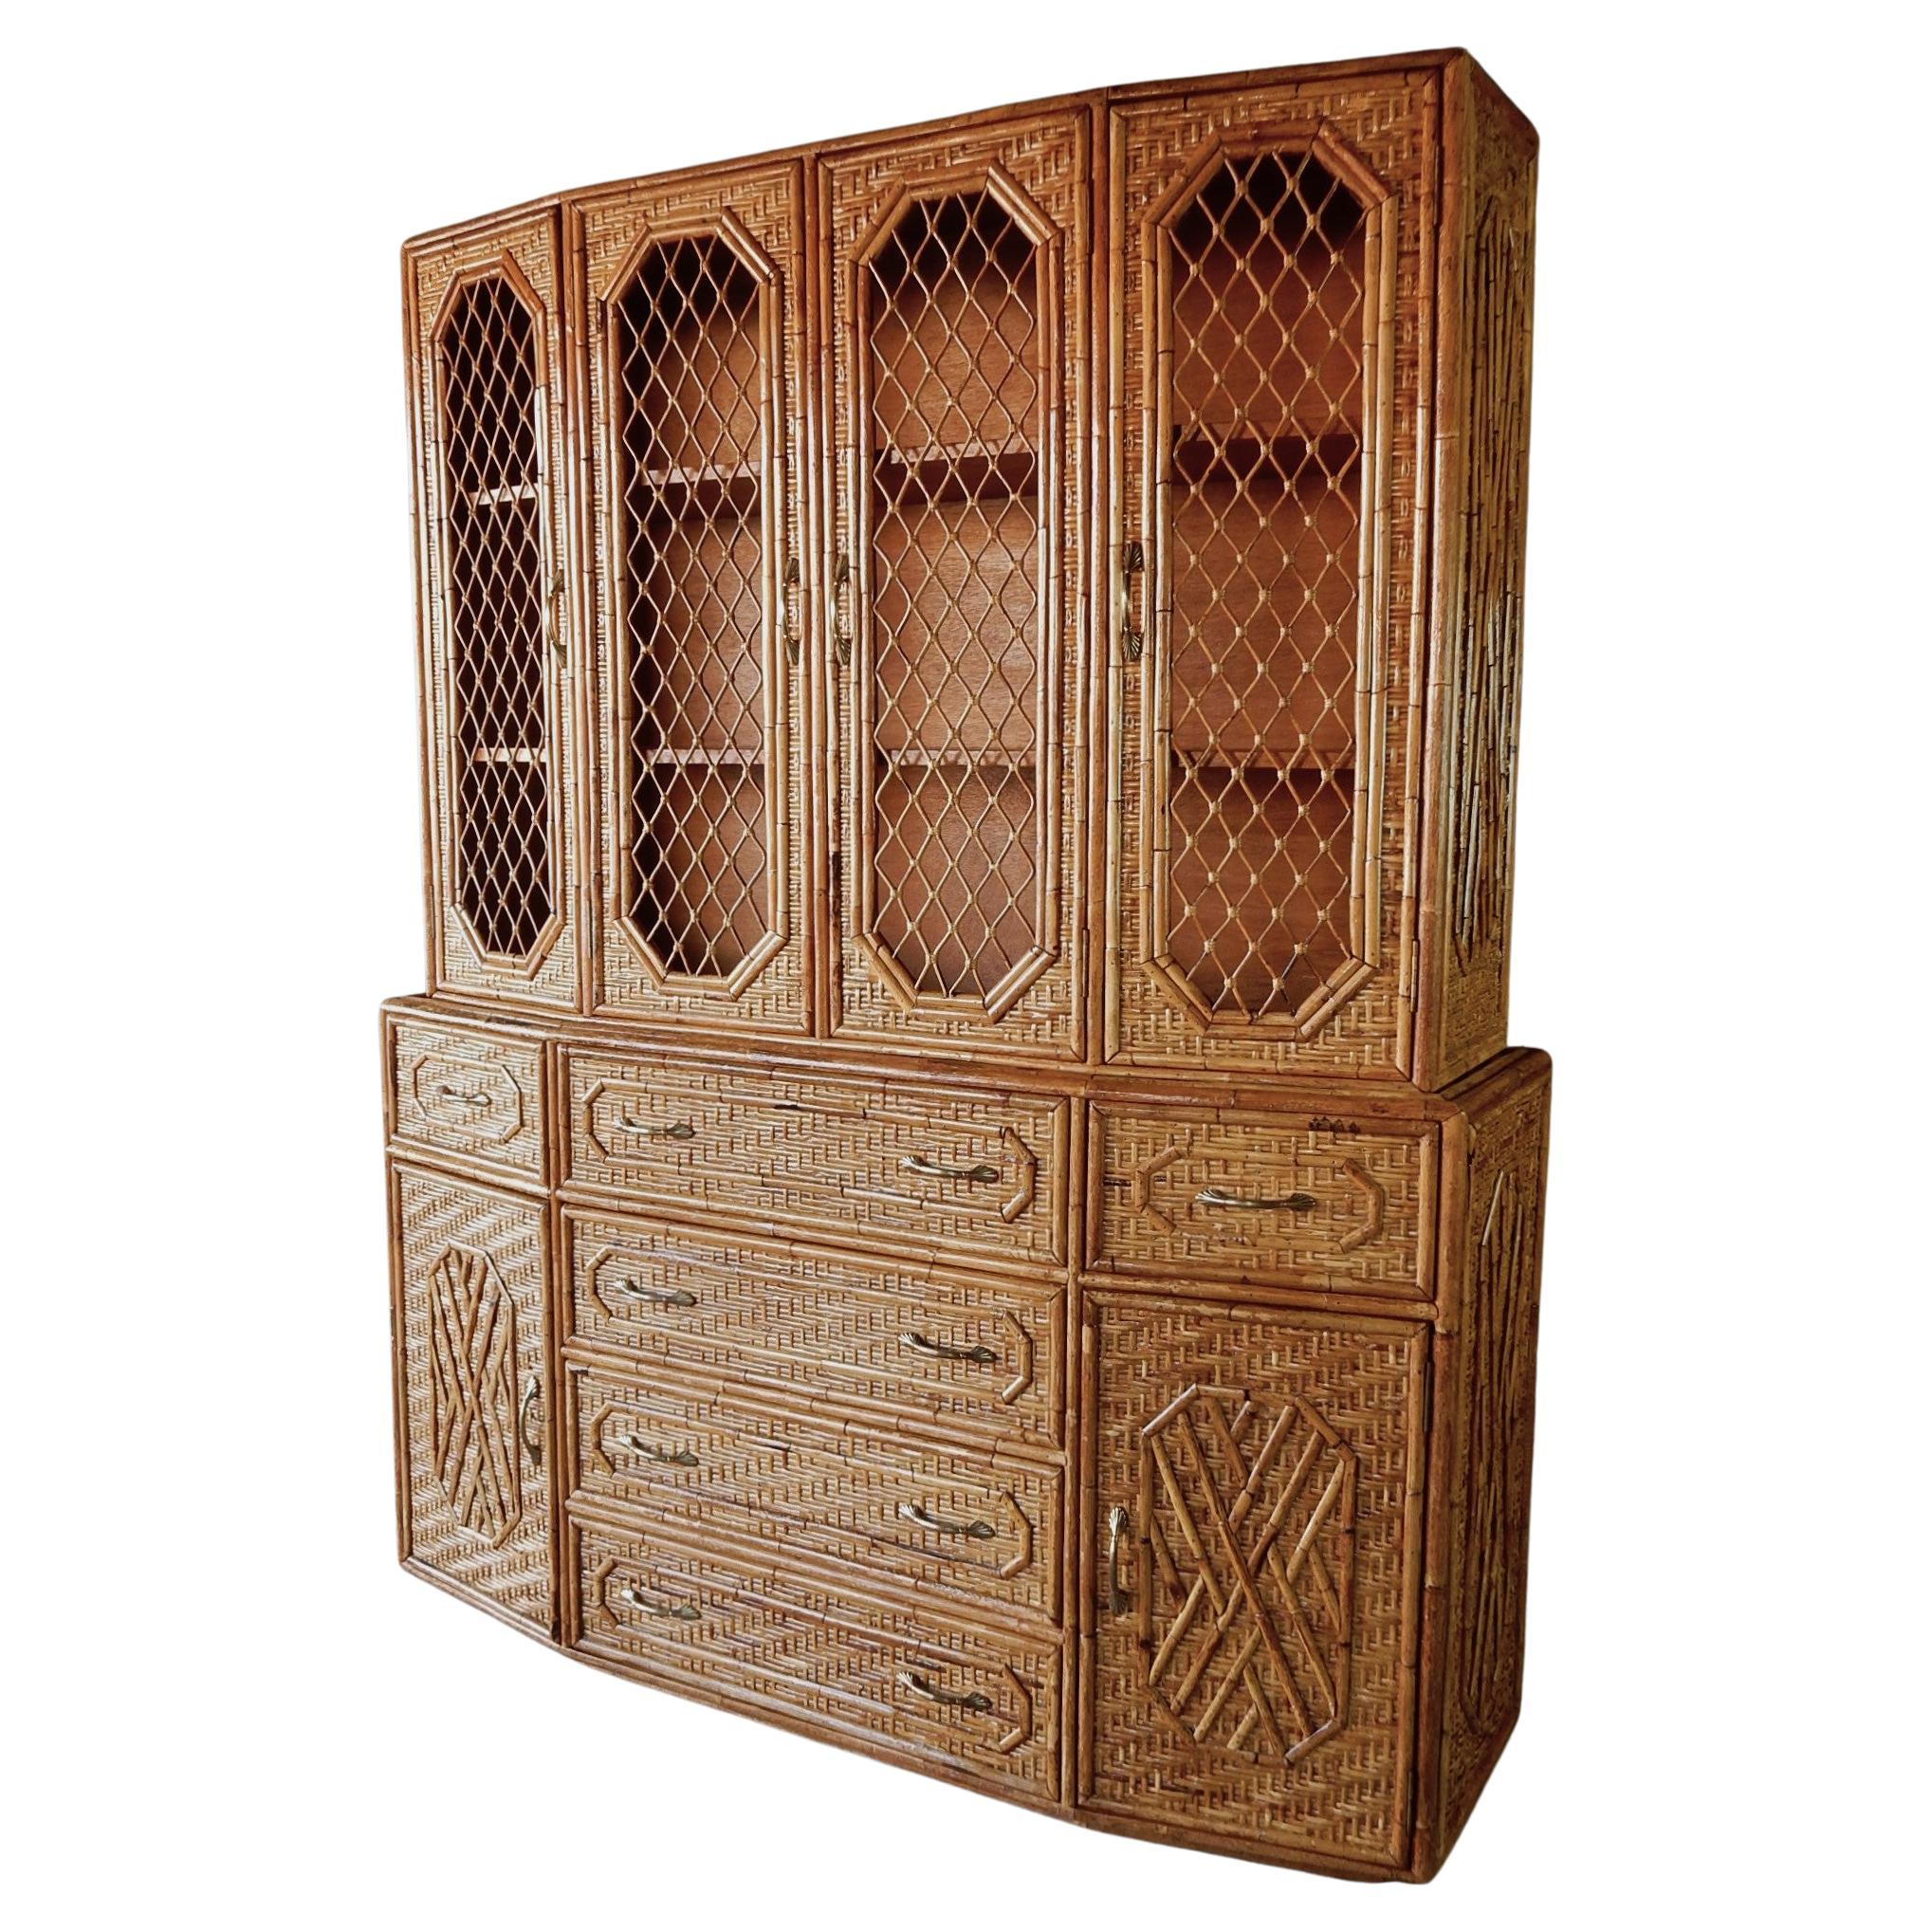 Vintage 1970's Lacquered Bamboo Cane Sideboard Cabinet   In Good Condition For Sale In Las Vegas, NV